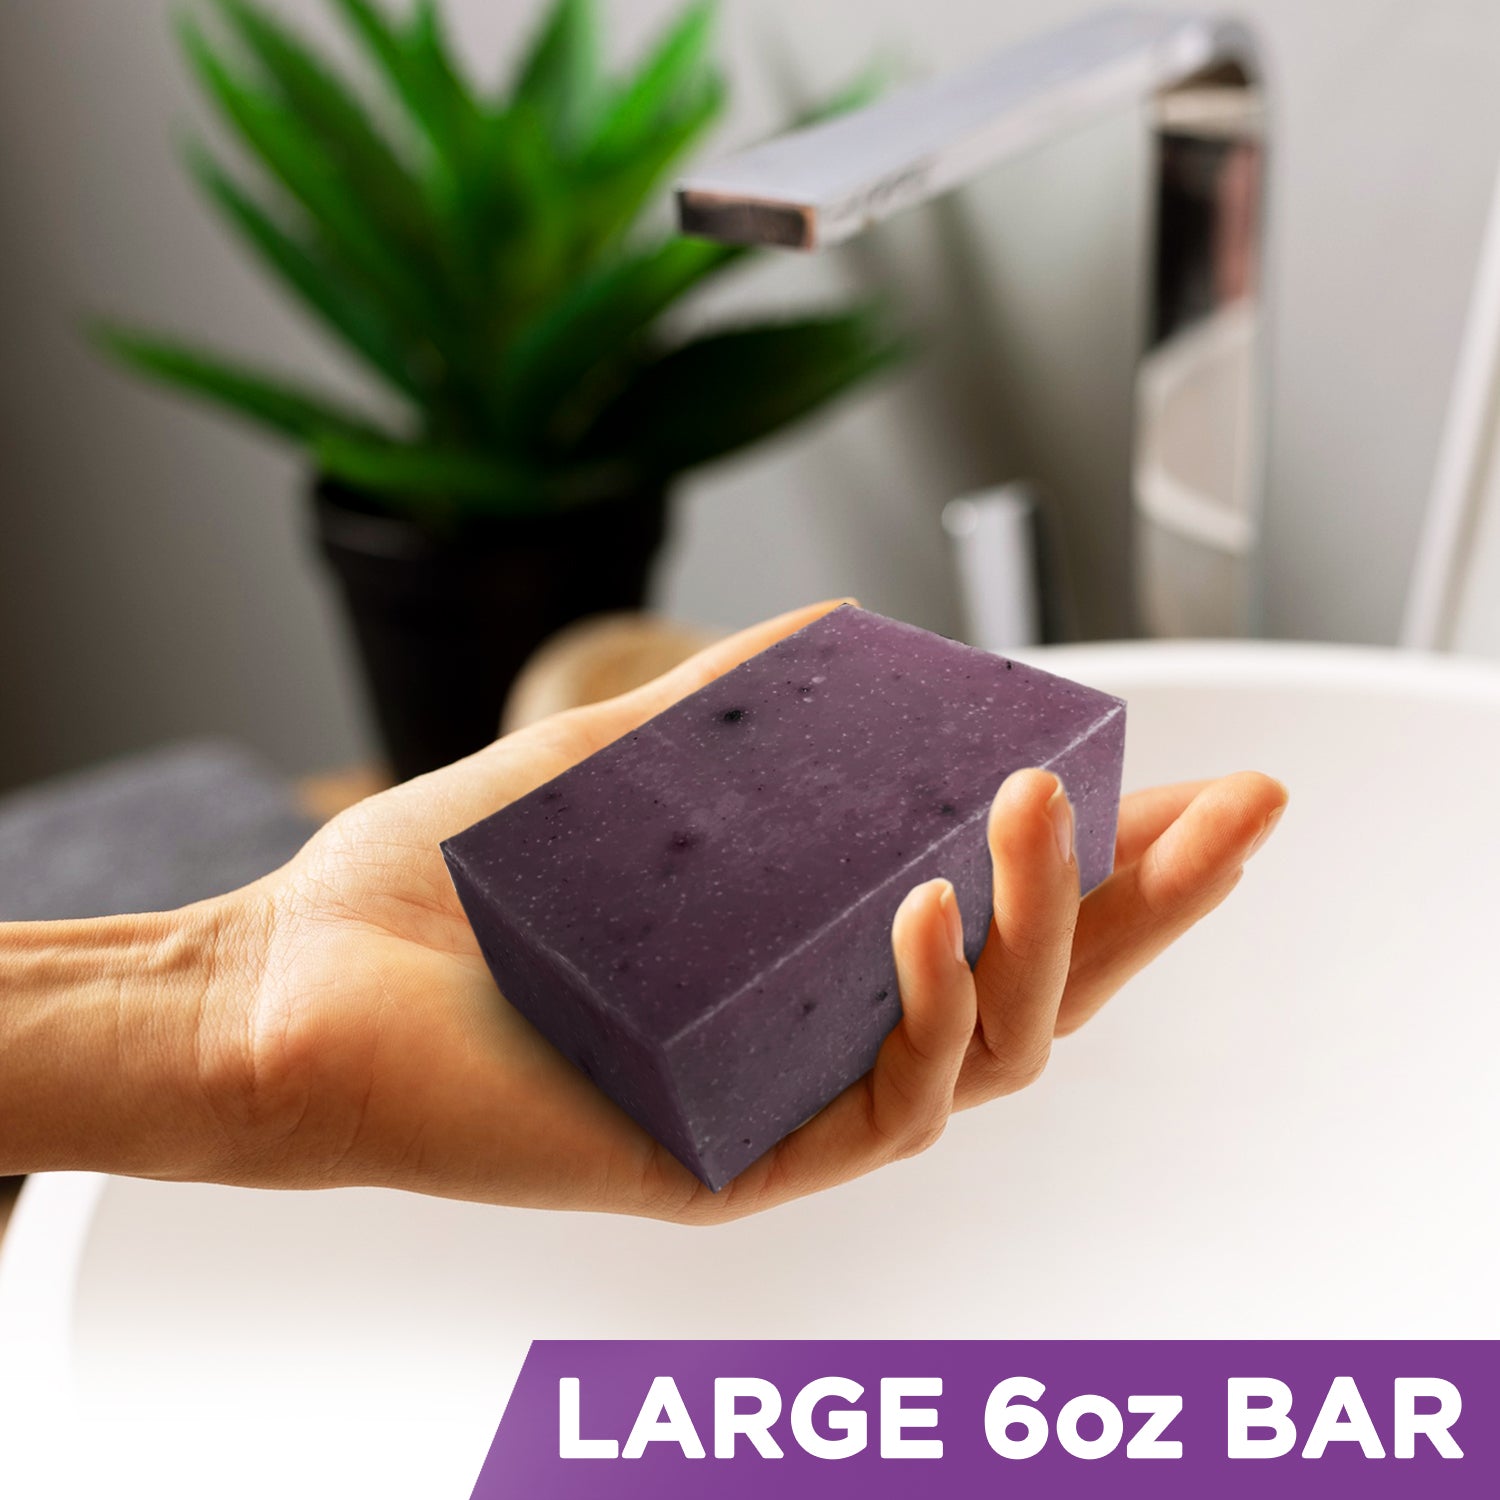 Introducing Our New Lavender and Wildflower Bar Soap!